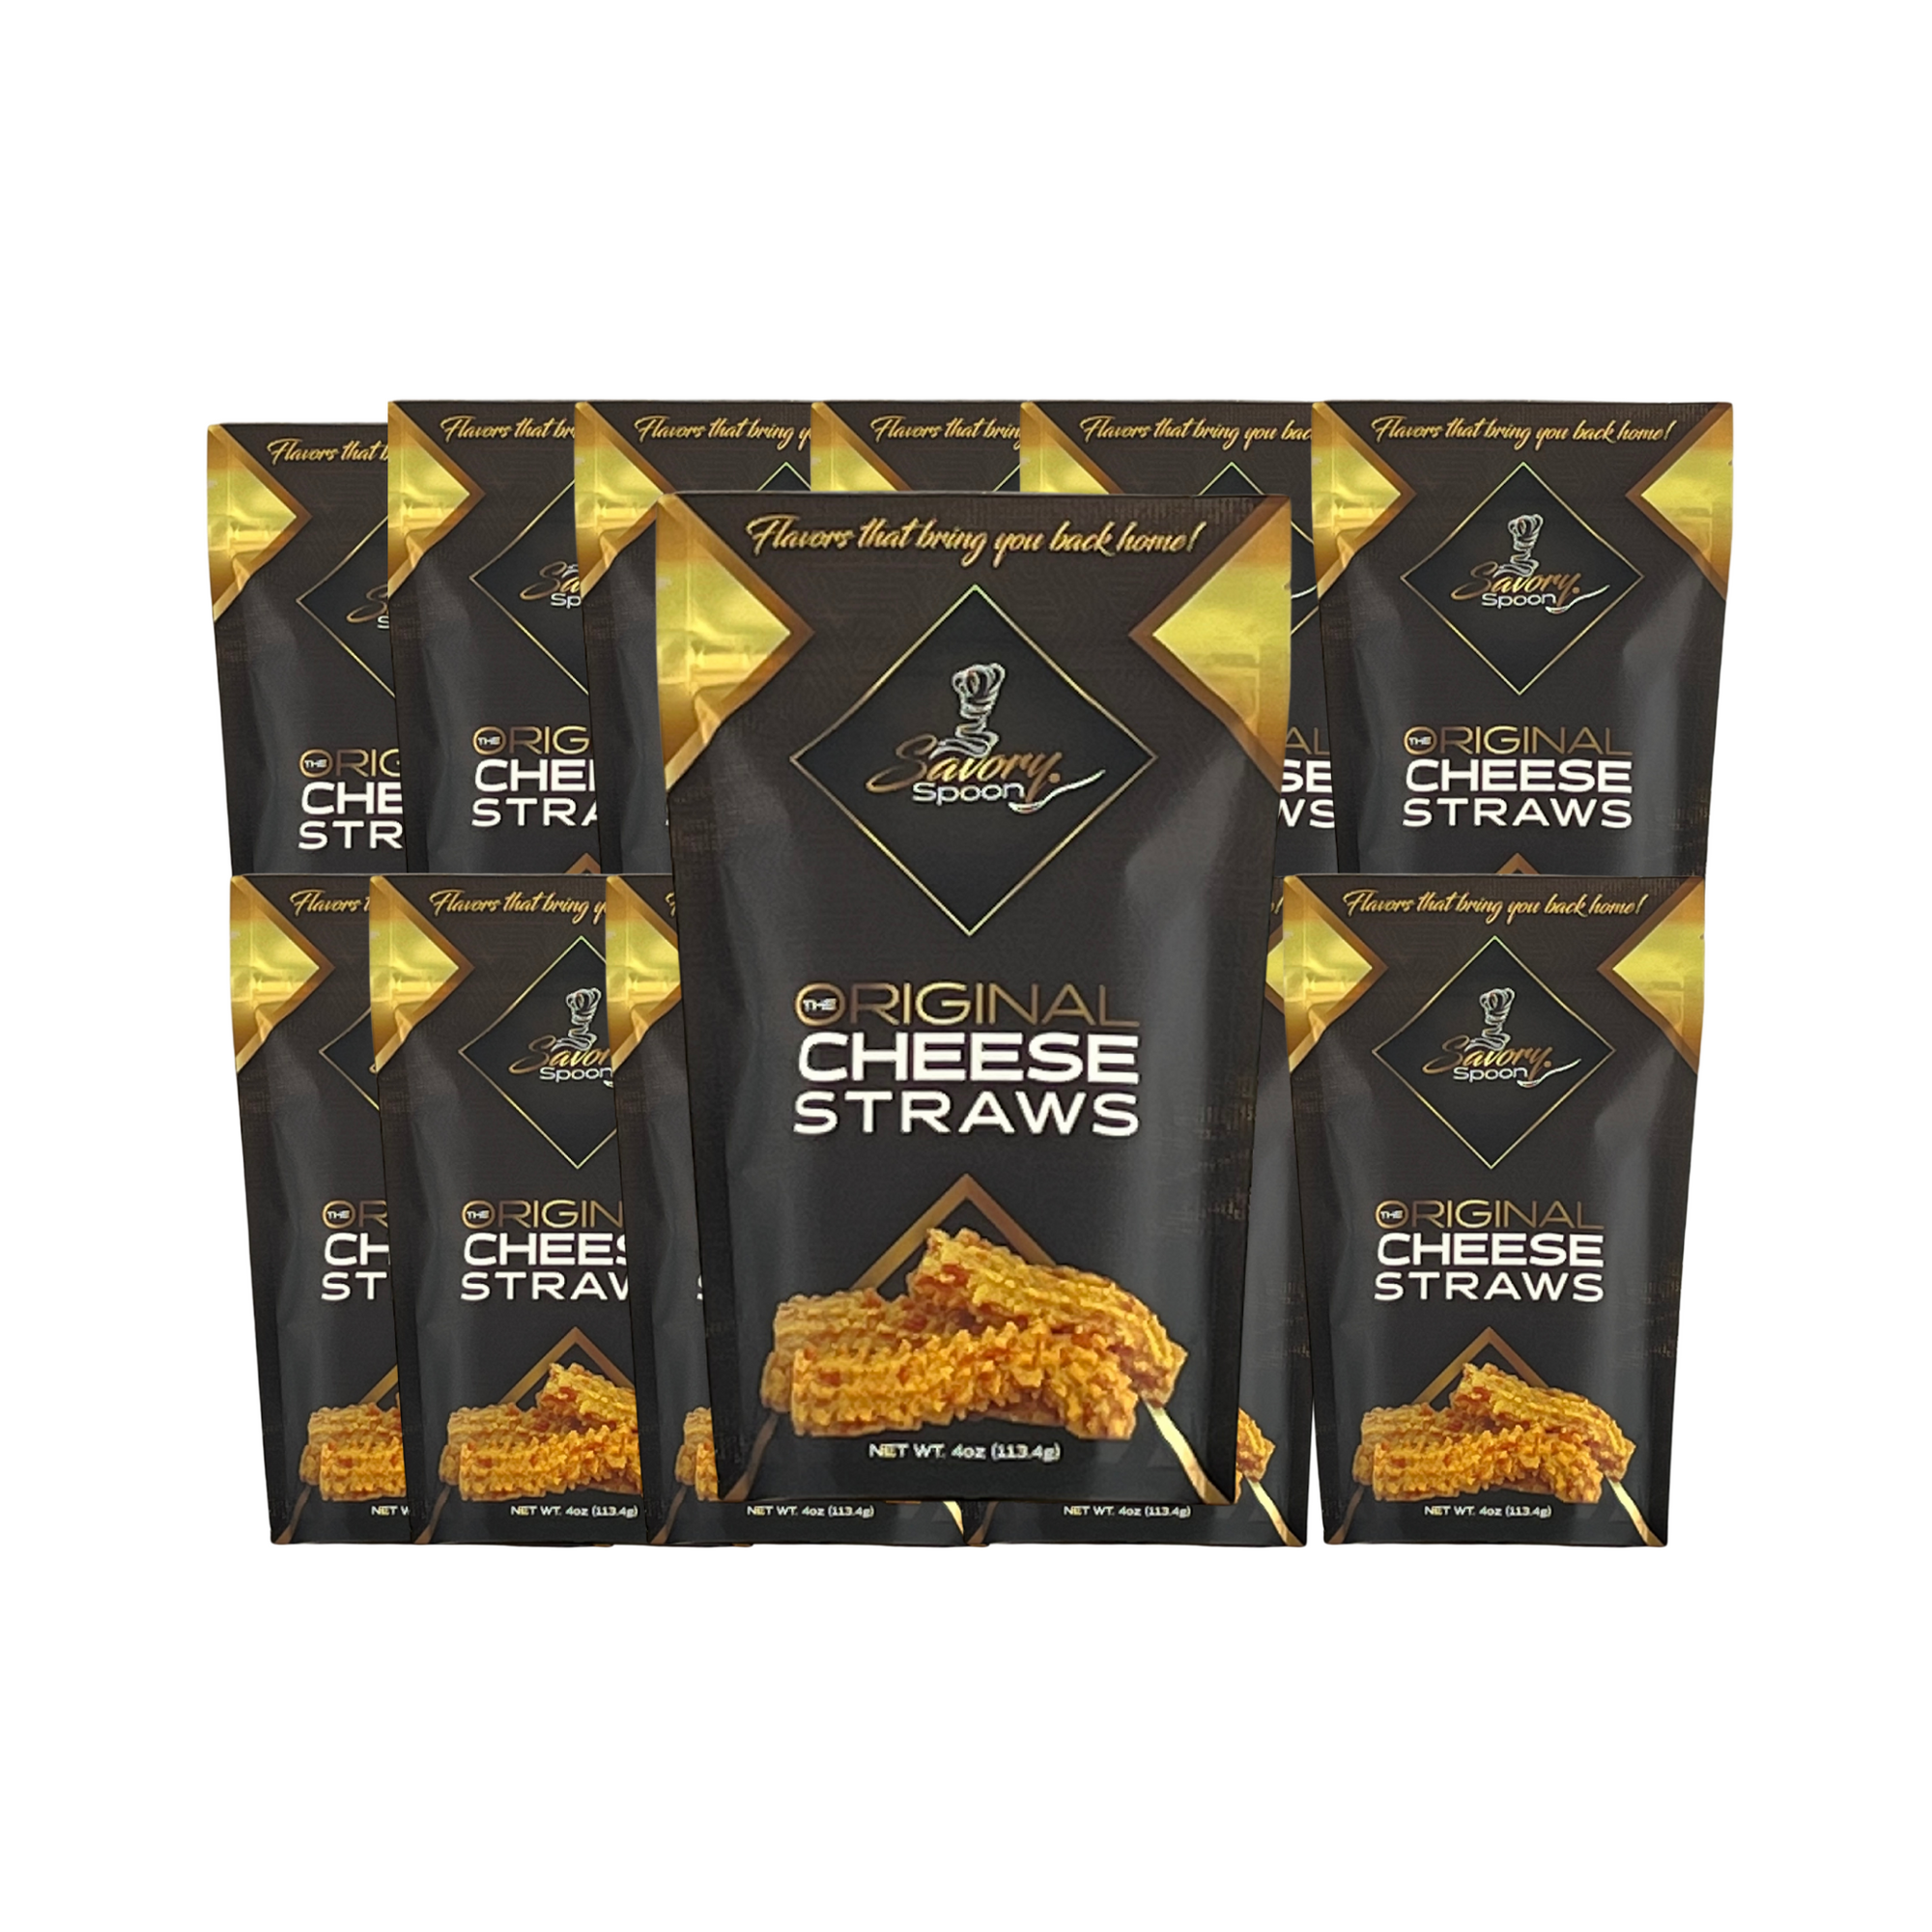 Original Cheese Straw- 12 Bags + Free Shipping - Due to High Demand, alternate packaging may be used for one or more products!